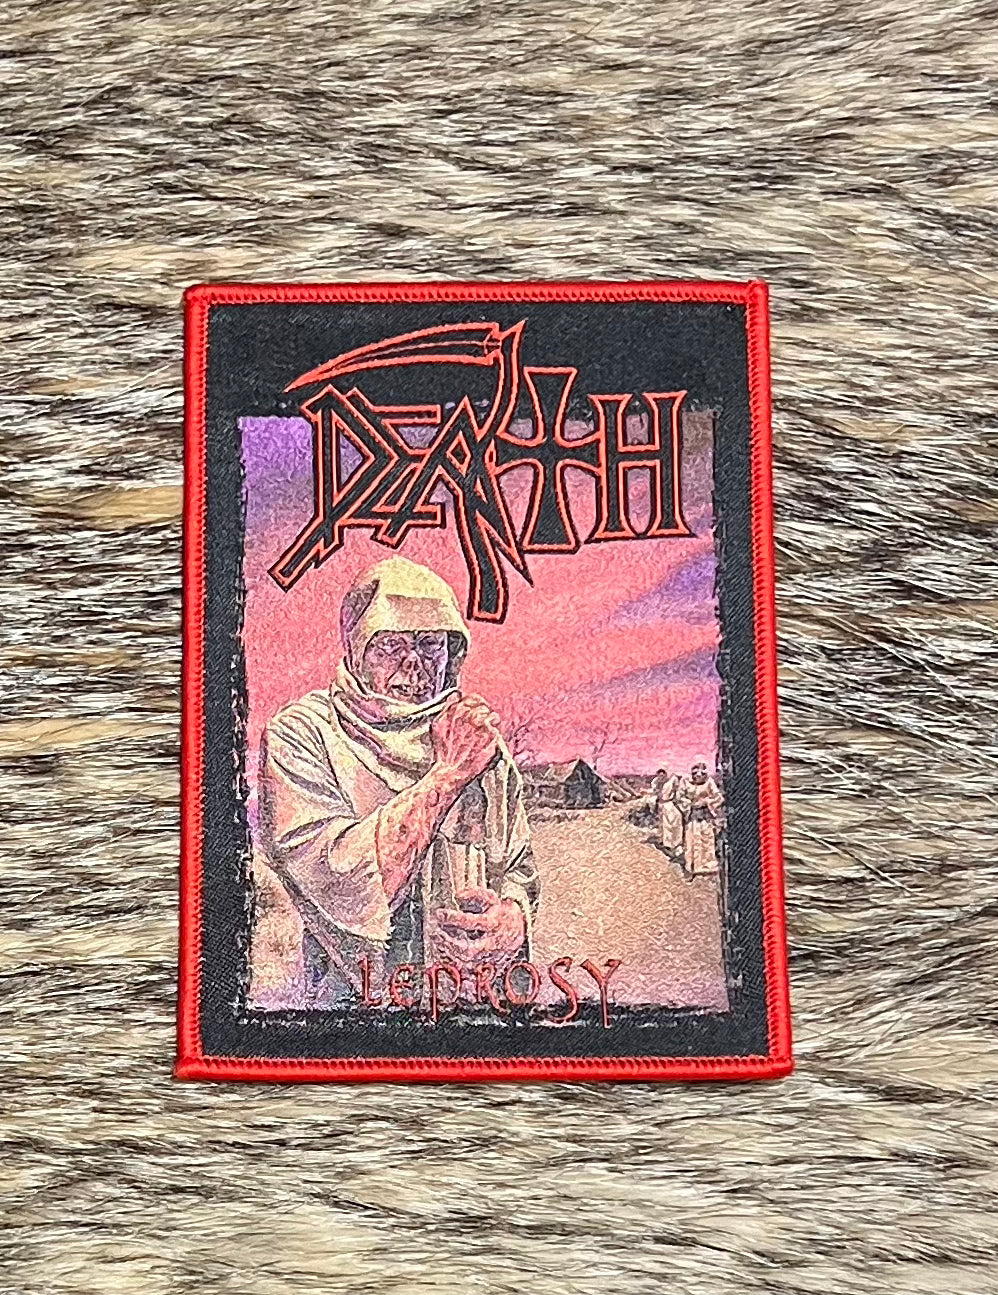 Death - Leprosy Patch